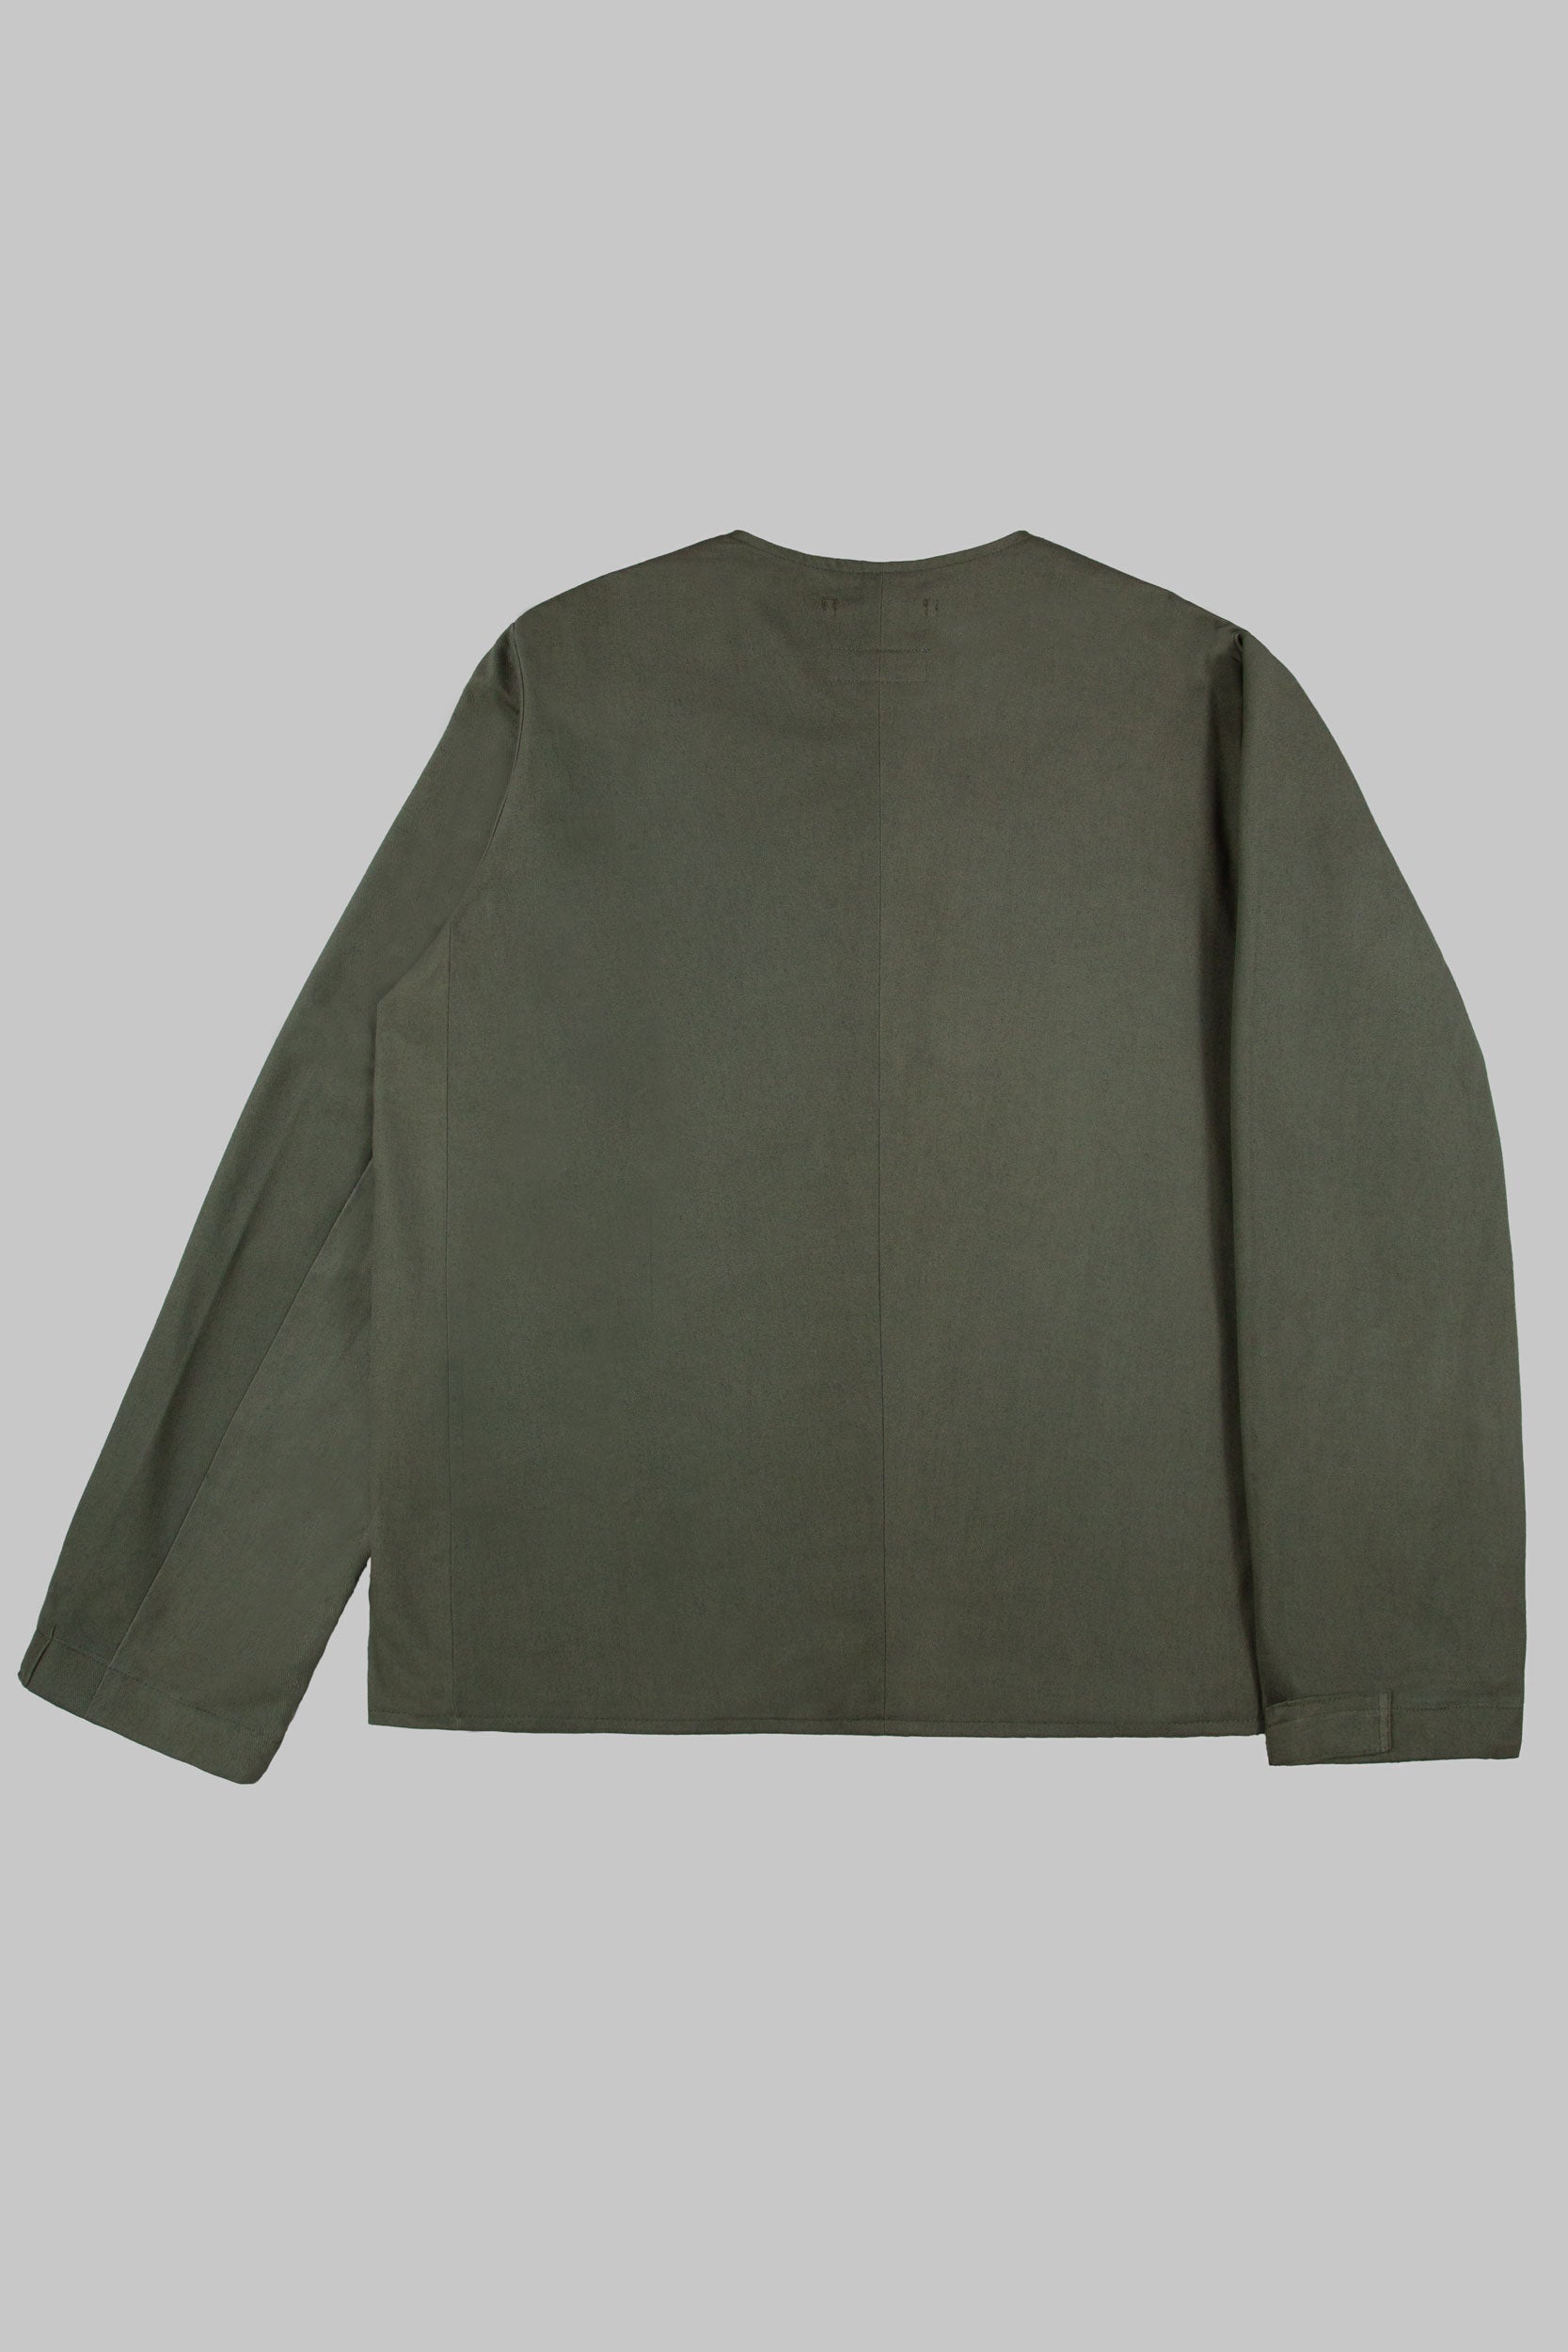 J Smith & Co. Coverall Liner Muted Olive